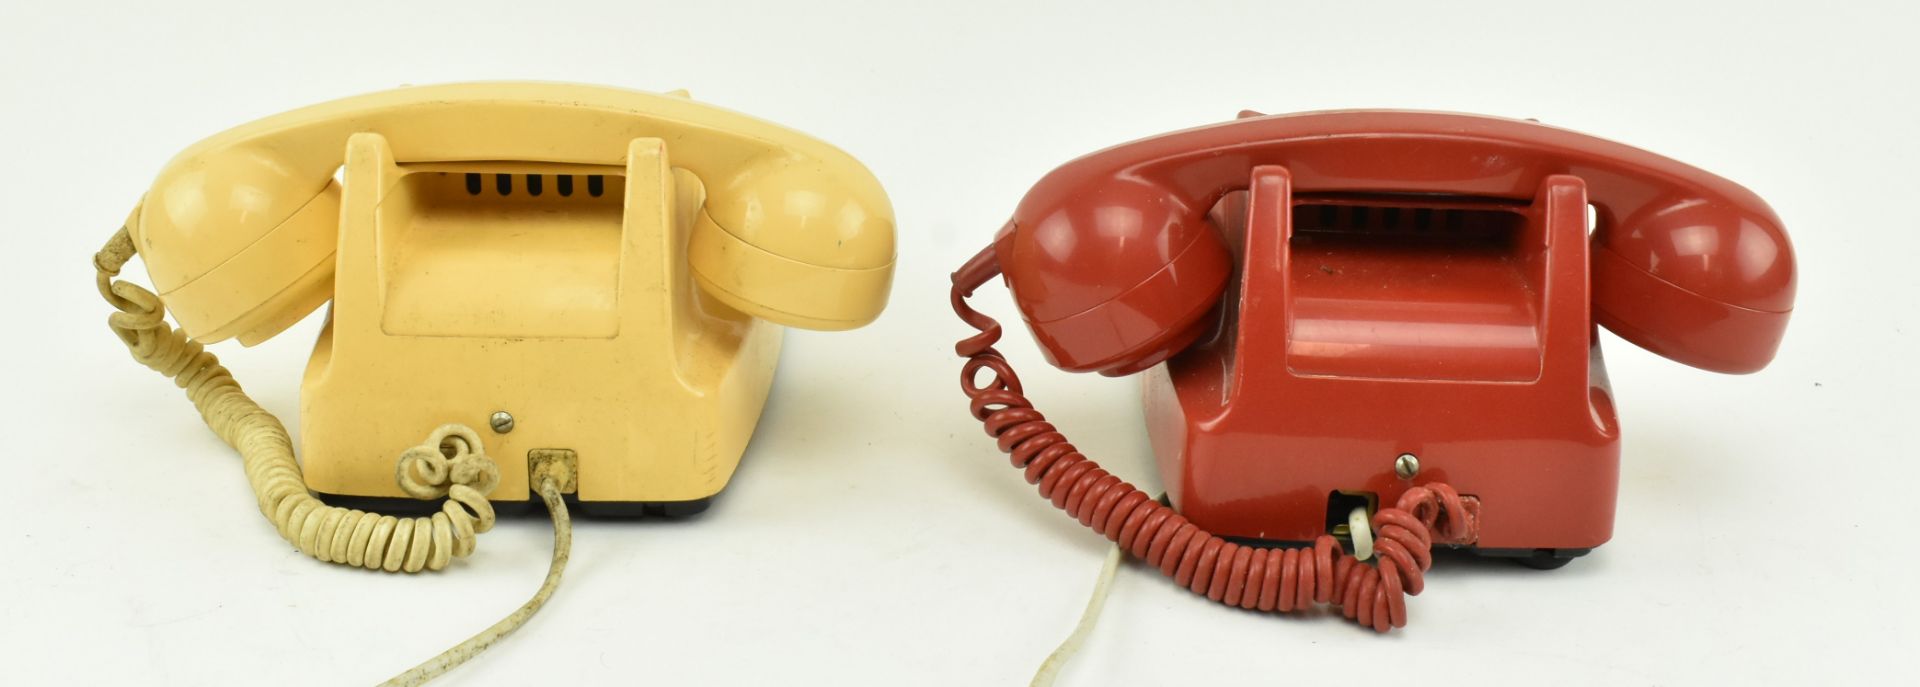 TWO VINTAGE G. P. O. ROTARY DIAL TELEPHONES, ONE RED ONE CREAM - Image 5 of 7